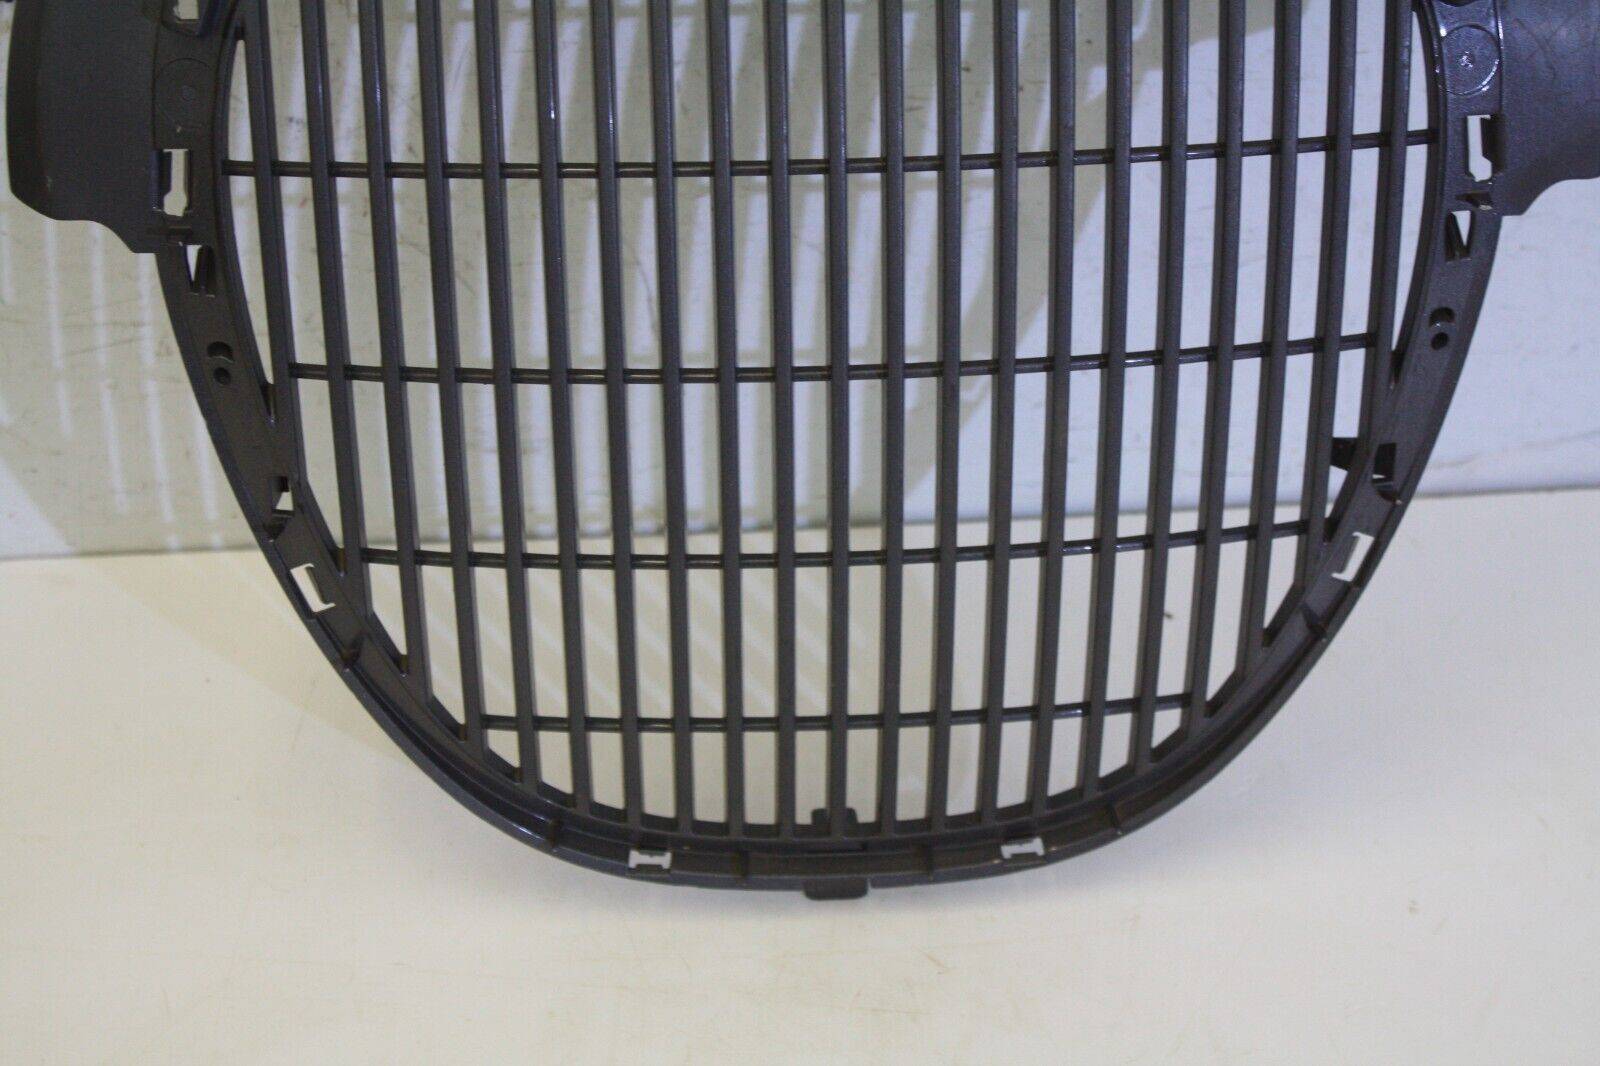 Jaguar-S-Type-Front-Bumper-Grill-1998-TO-2007-4R83-8A100-AB-Genuine-176238703578-4